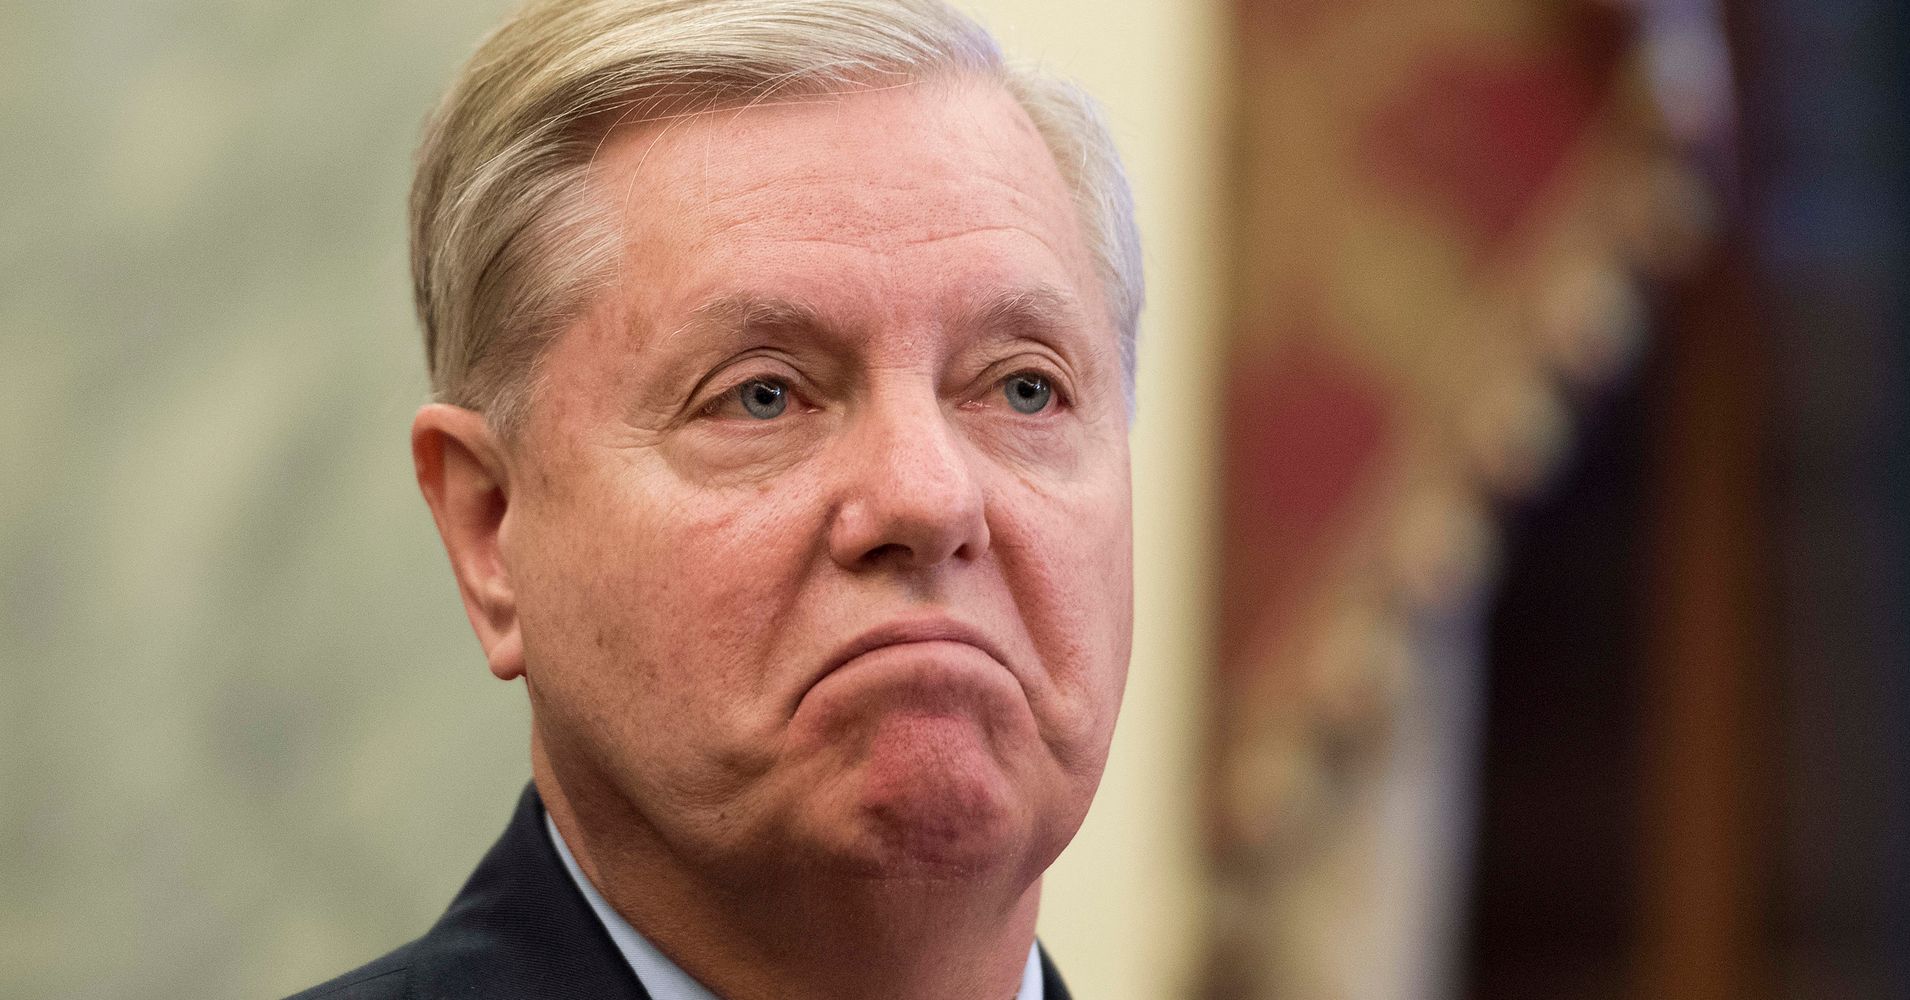 Lindsey Graham’s Old Comments About Impeachment Come Back To Haunt Him | HuffPost